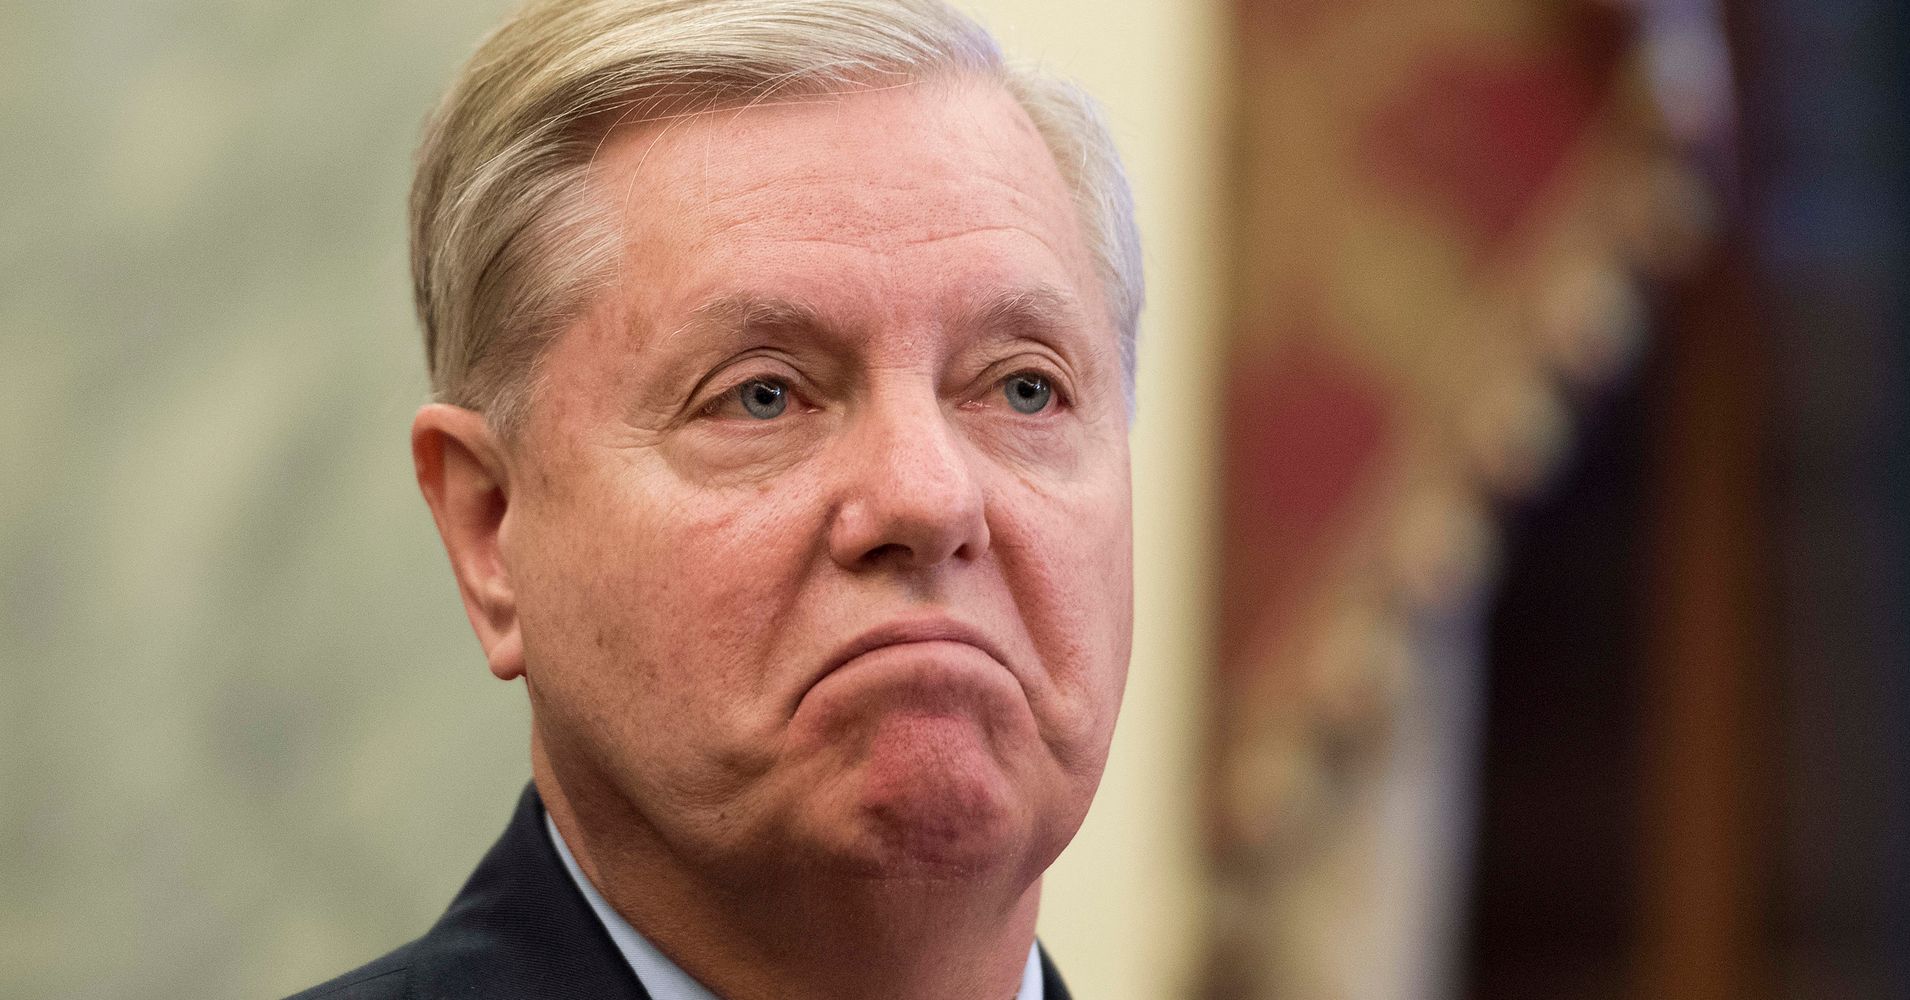 Lindsey Graham’s Old Comments About Impeachment Come Back To Haunt Him | HuffPost